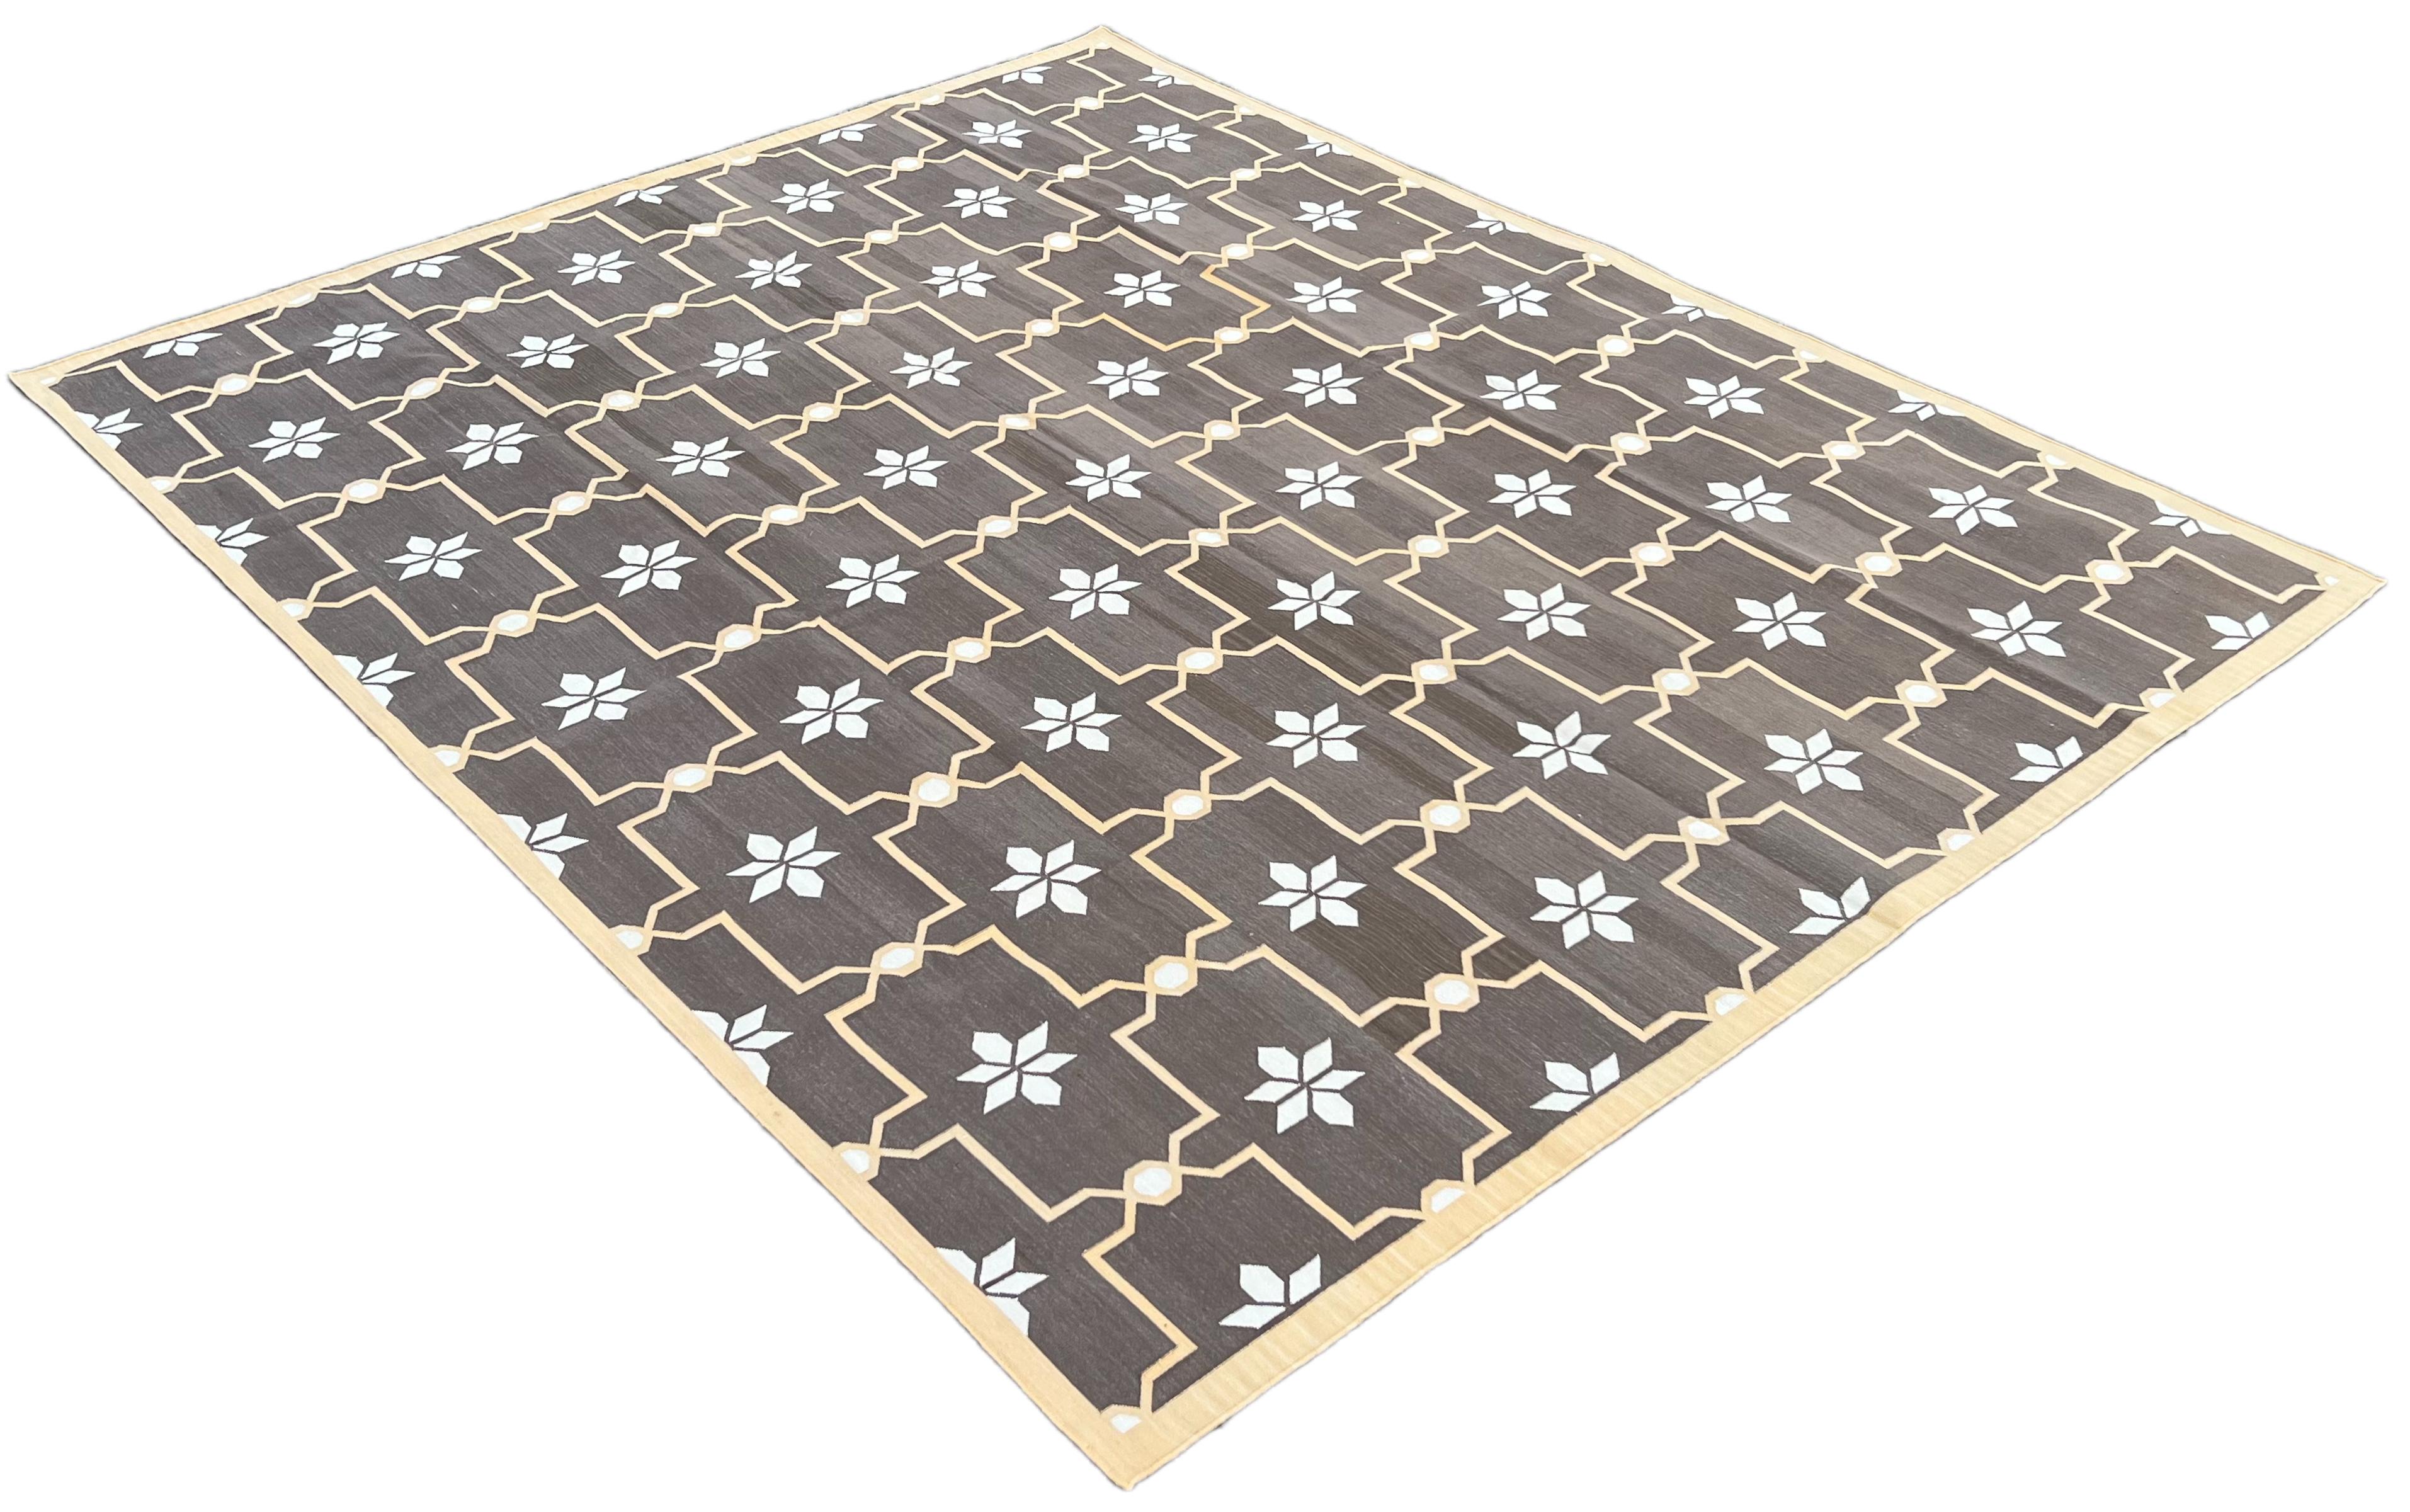 Cotton Natural Vegetable Dyed Coffee Brown And Cream Flower Pattern Indian Rug-8'x10'
These special flat-weave dhurries are hand-woven with 15 ply 100% cotton yarn. Due to the special manufacturing techniques used to create our rugs, the size and